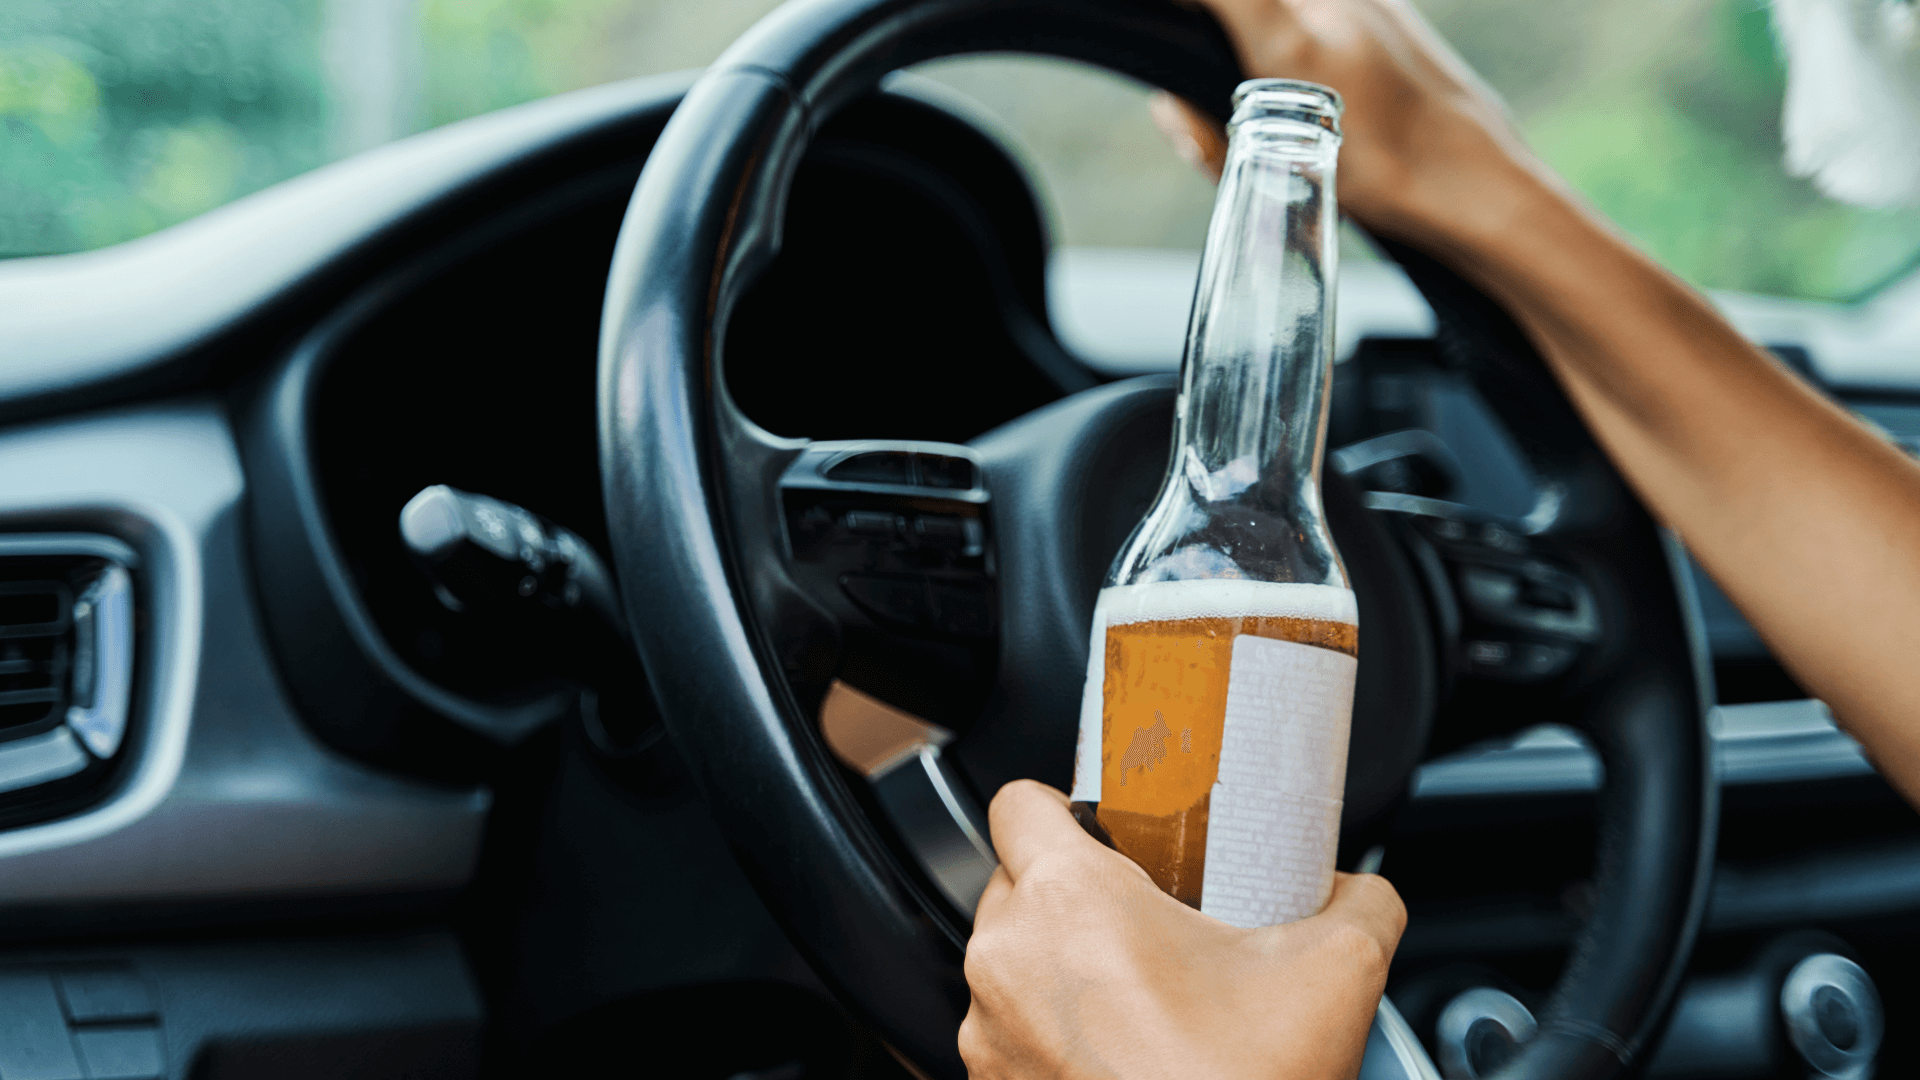 a woman's right hand grips a steering wheel while her left hand rests on it while holding a half-full bottle of beer